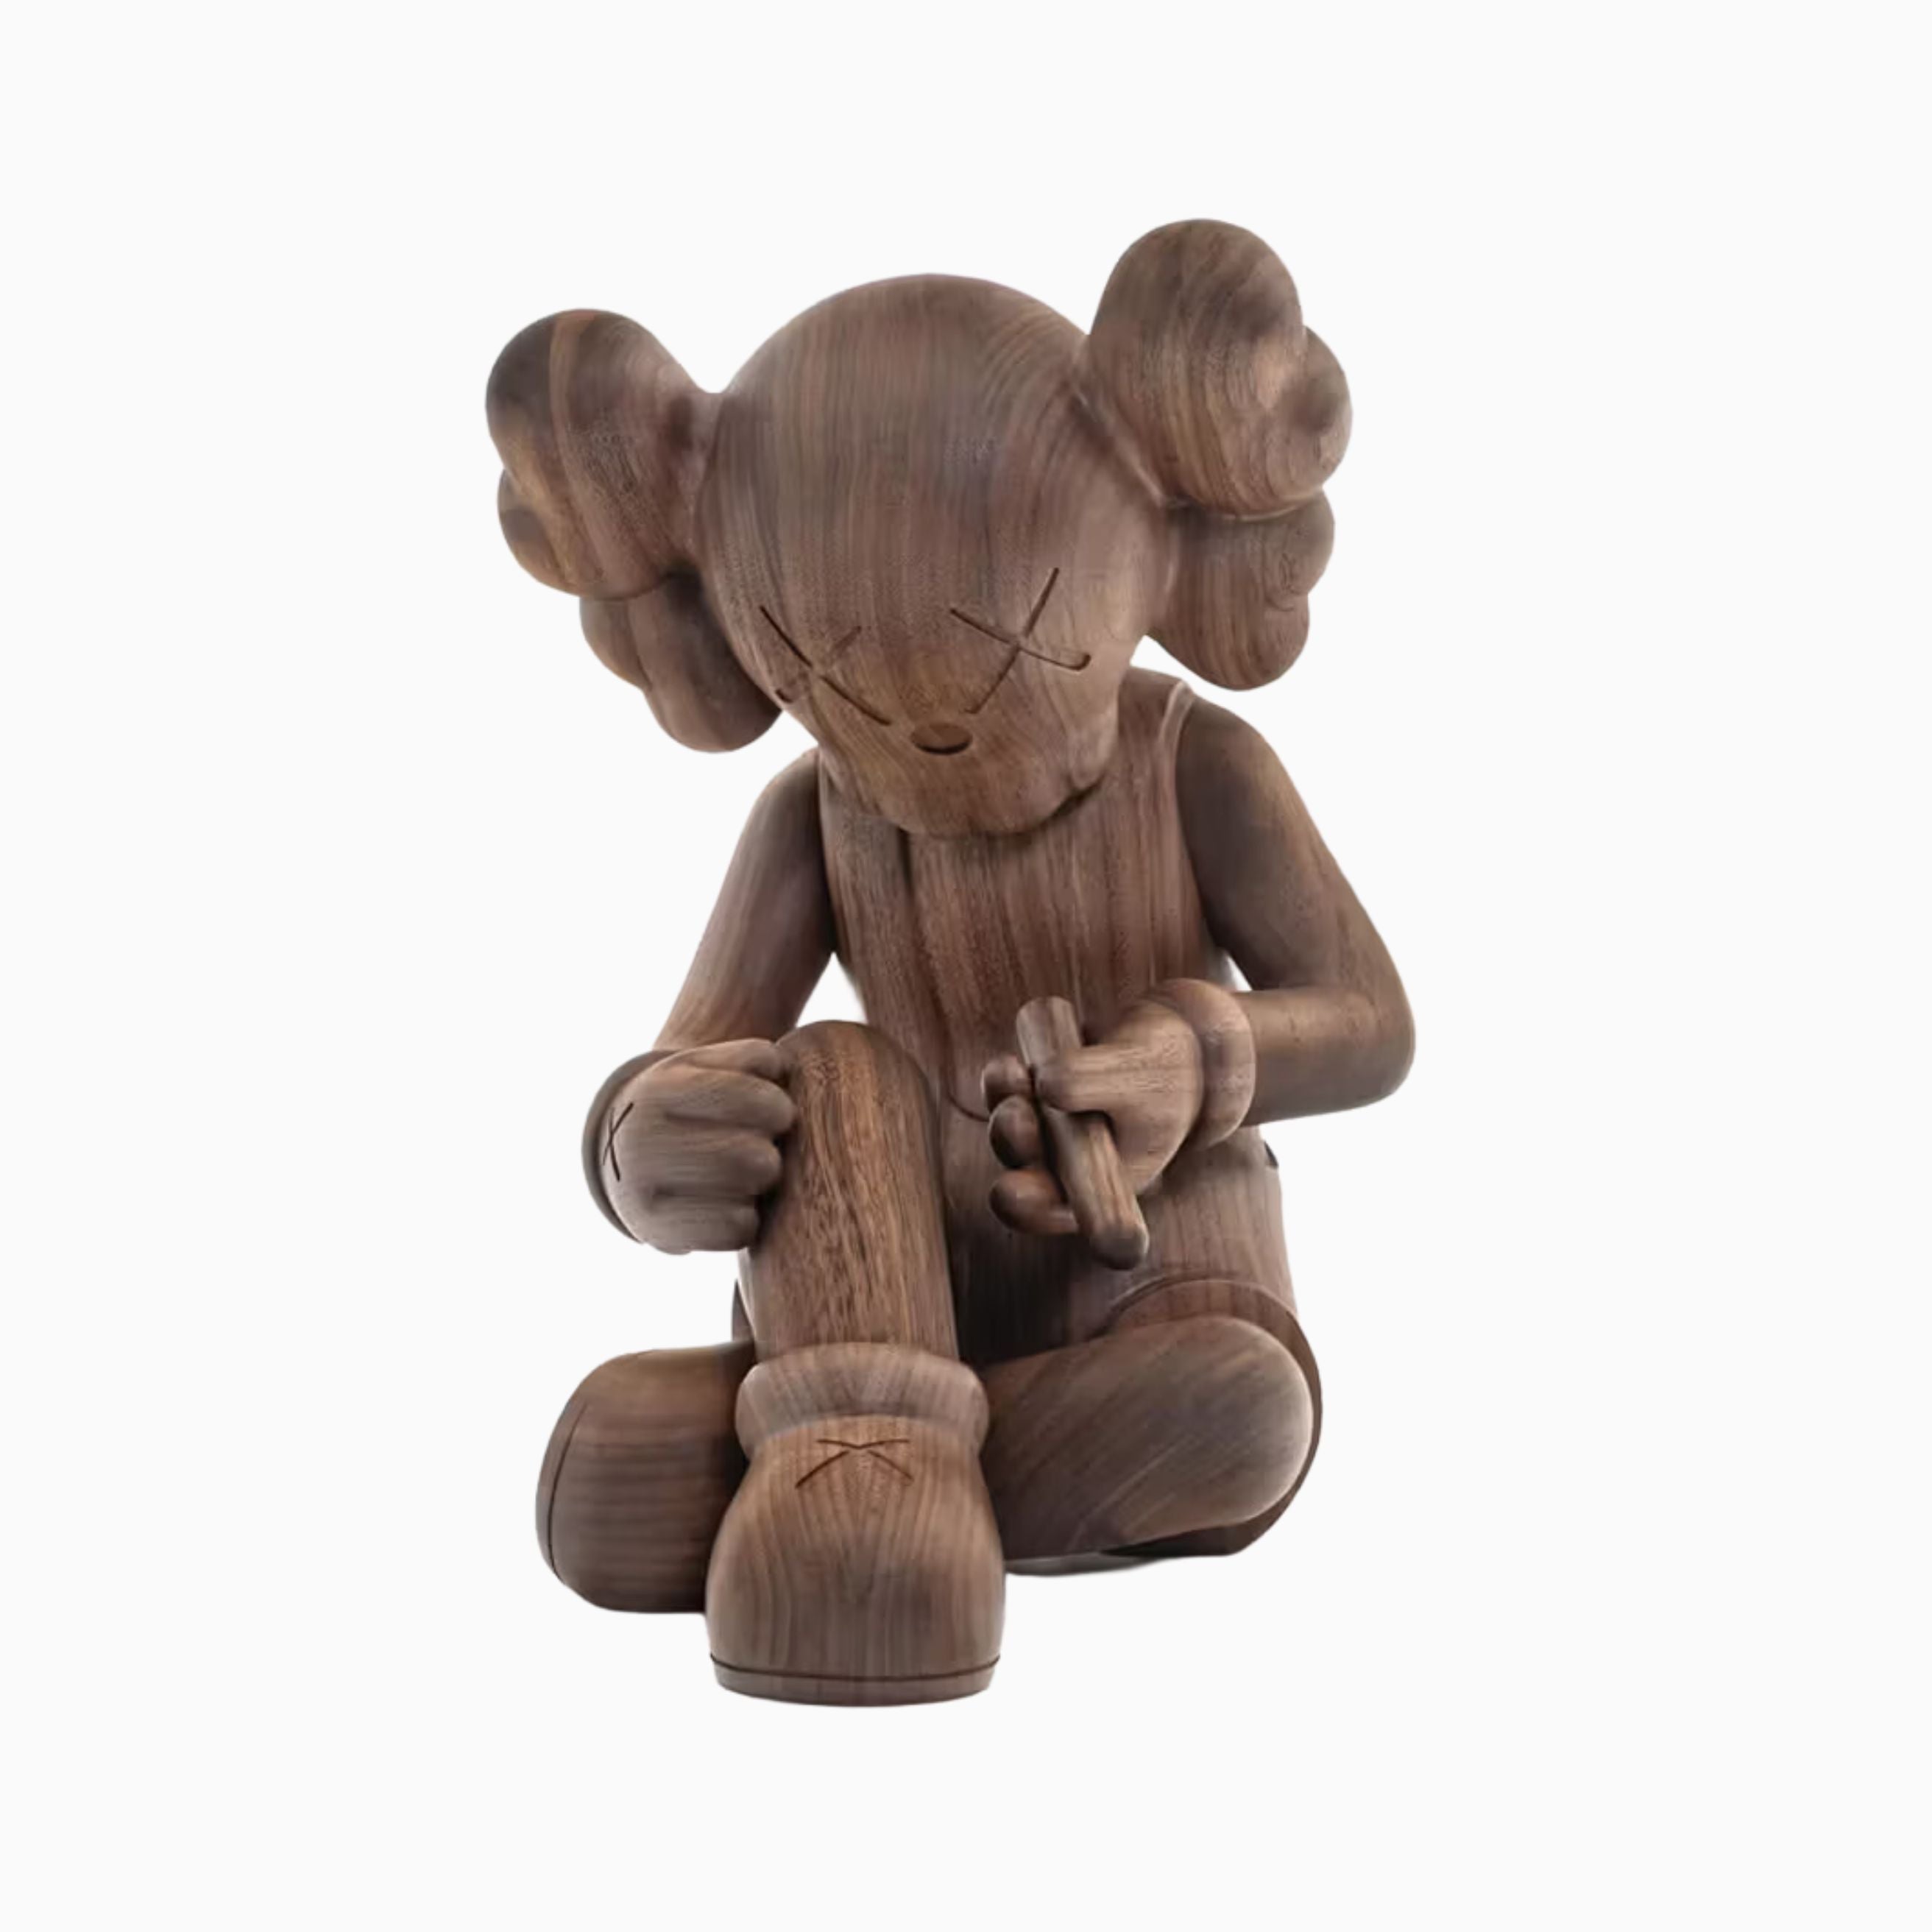 KAWS, Better Knowing, 2023 For Sale - Lougher Contemporary